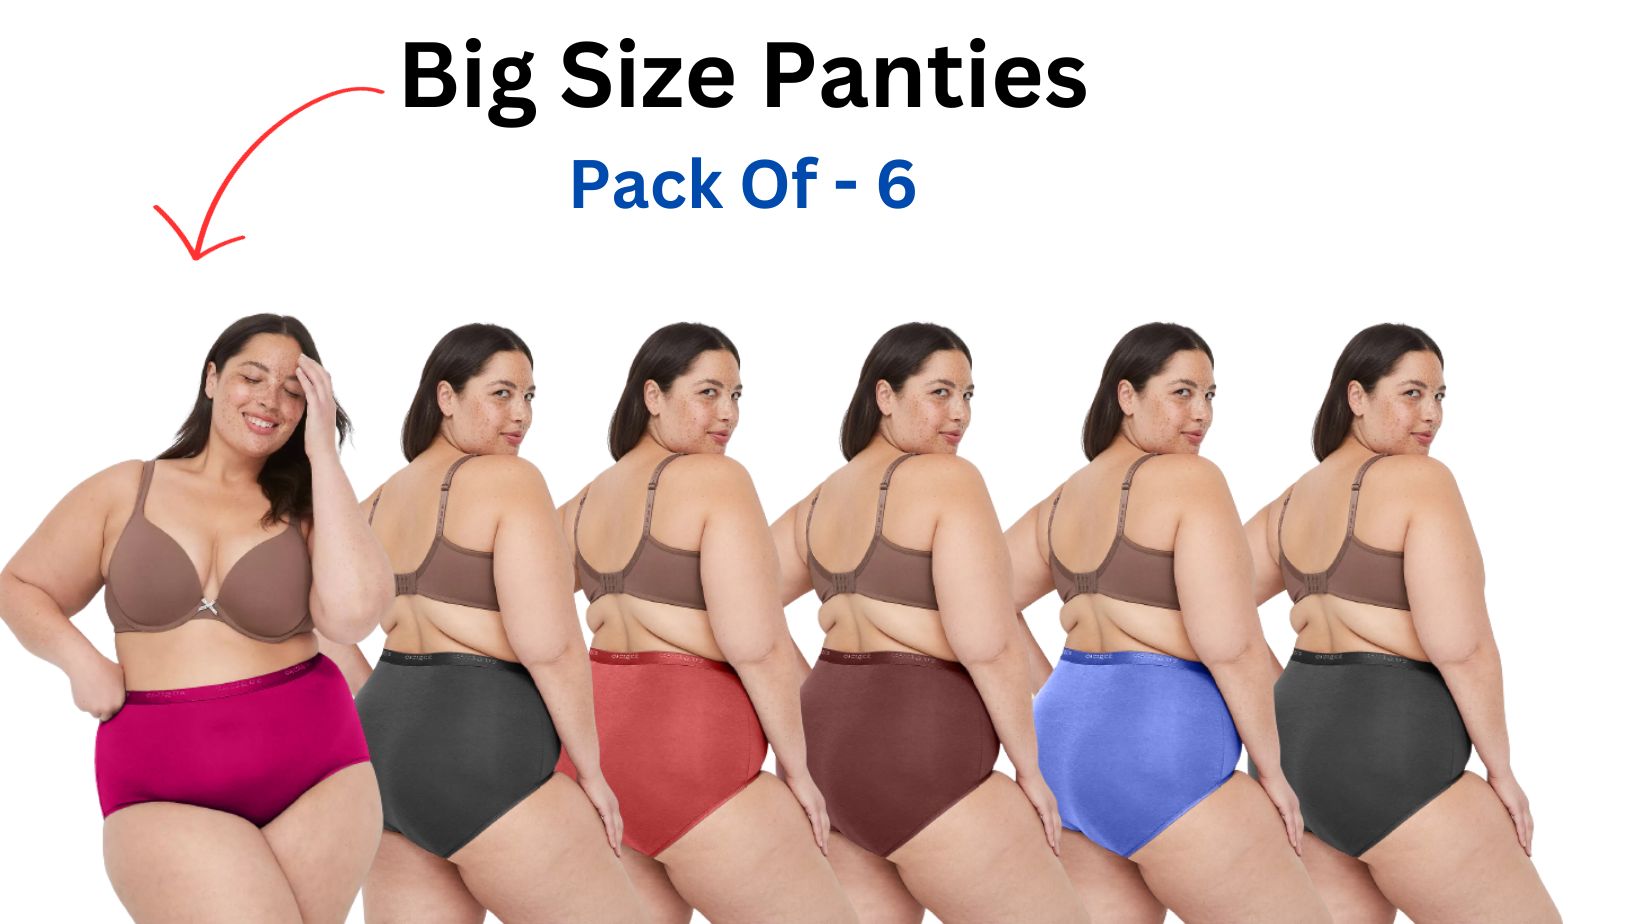 Plus Size Cotton Panties for Women | High Waist Panty with Full Coverage |  Inside Elastic - No Elastic Exposure to Skin | Plus Size | Pack of 3